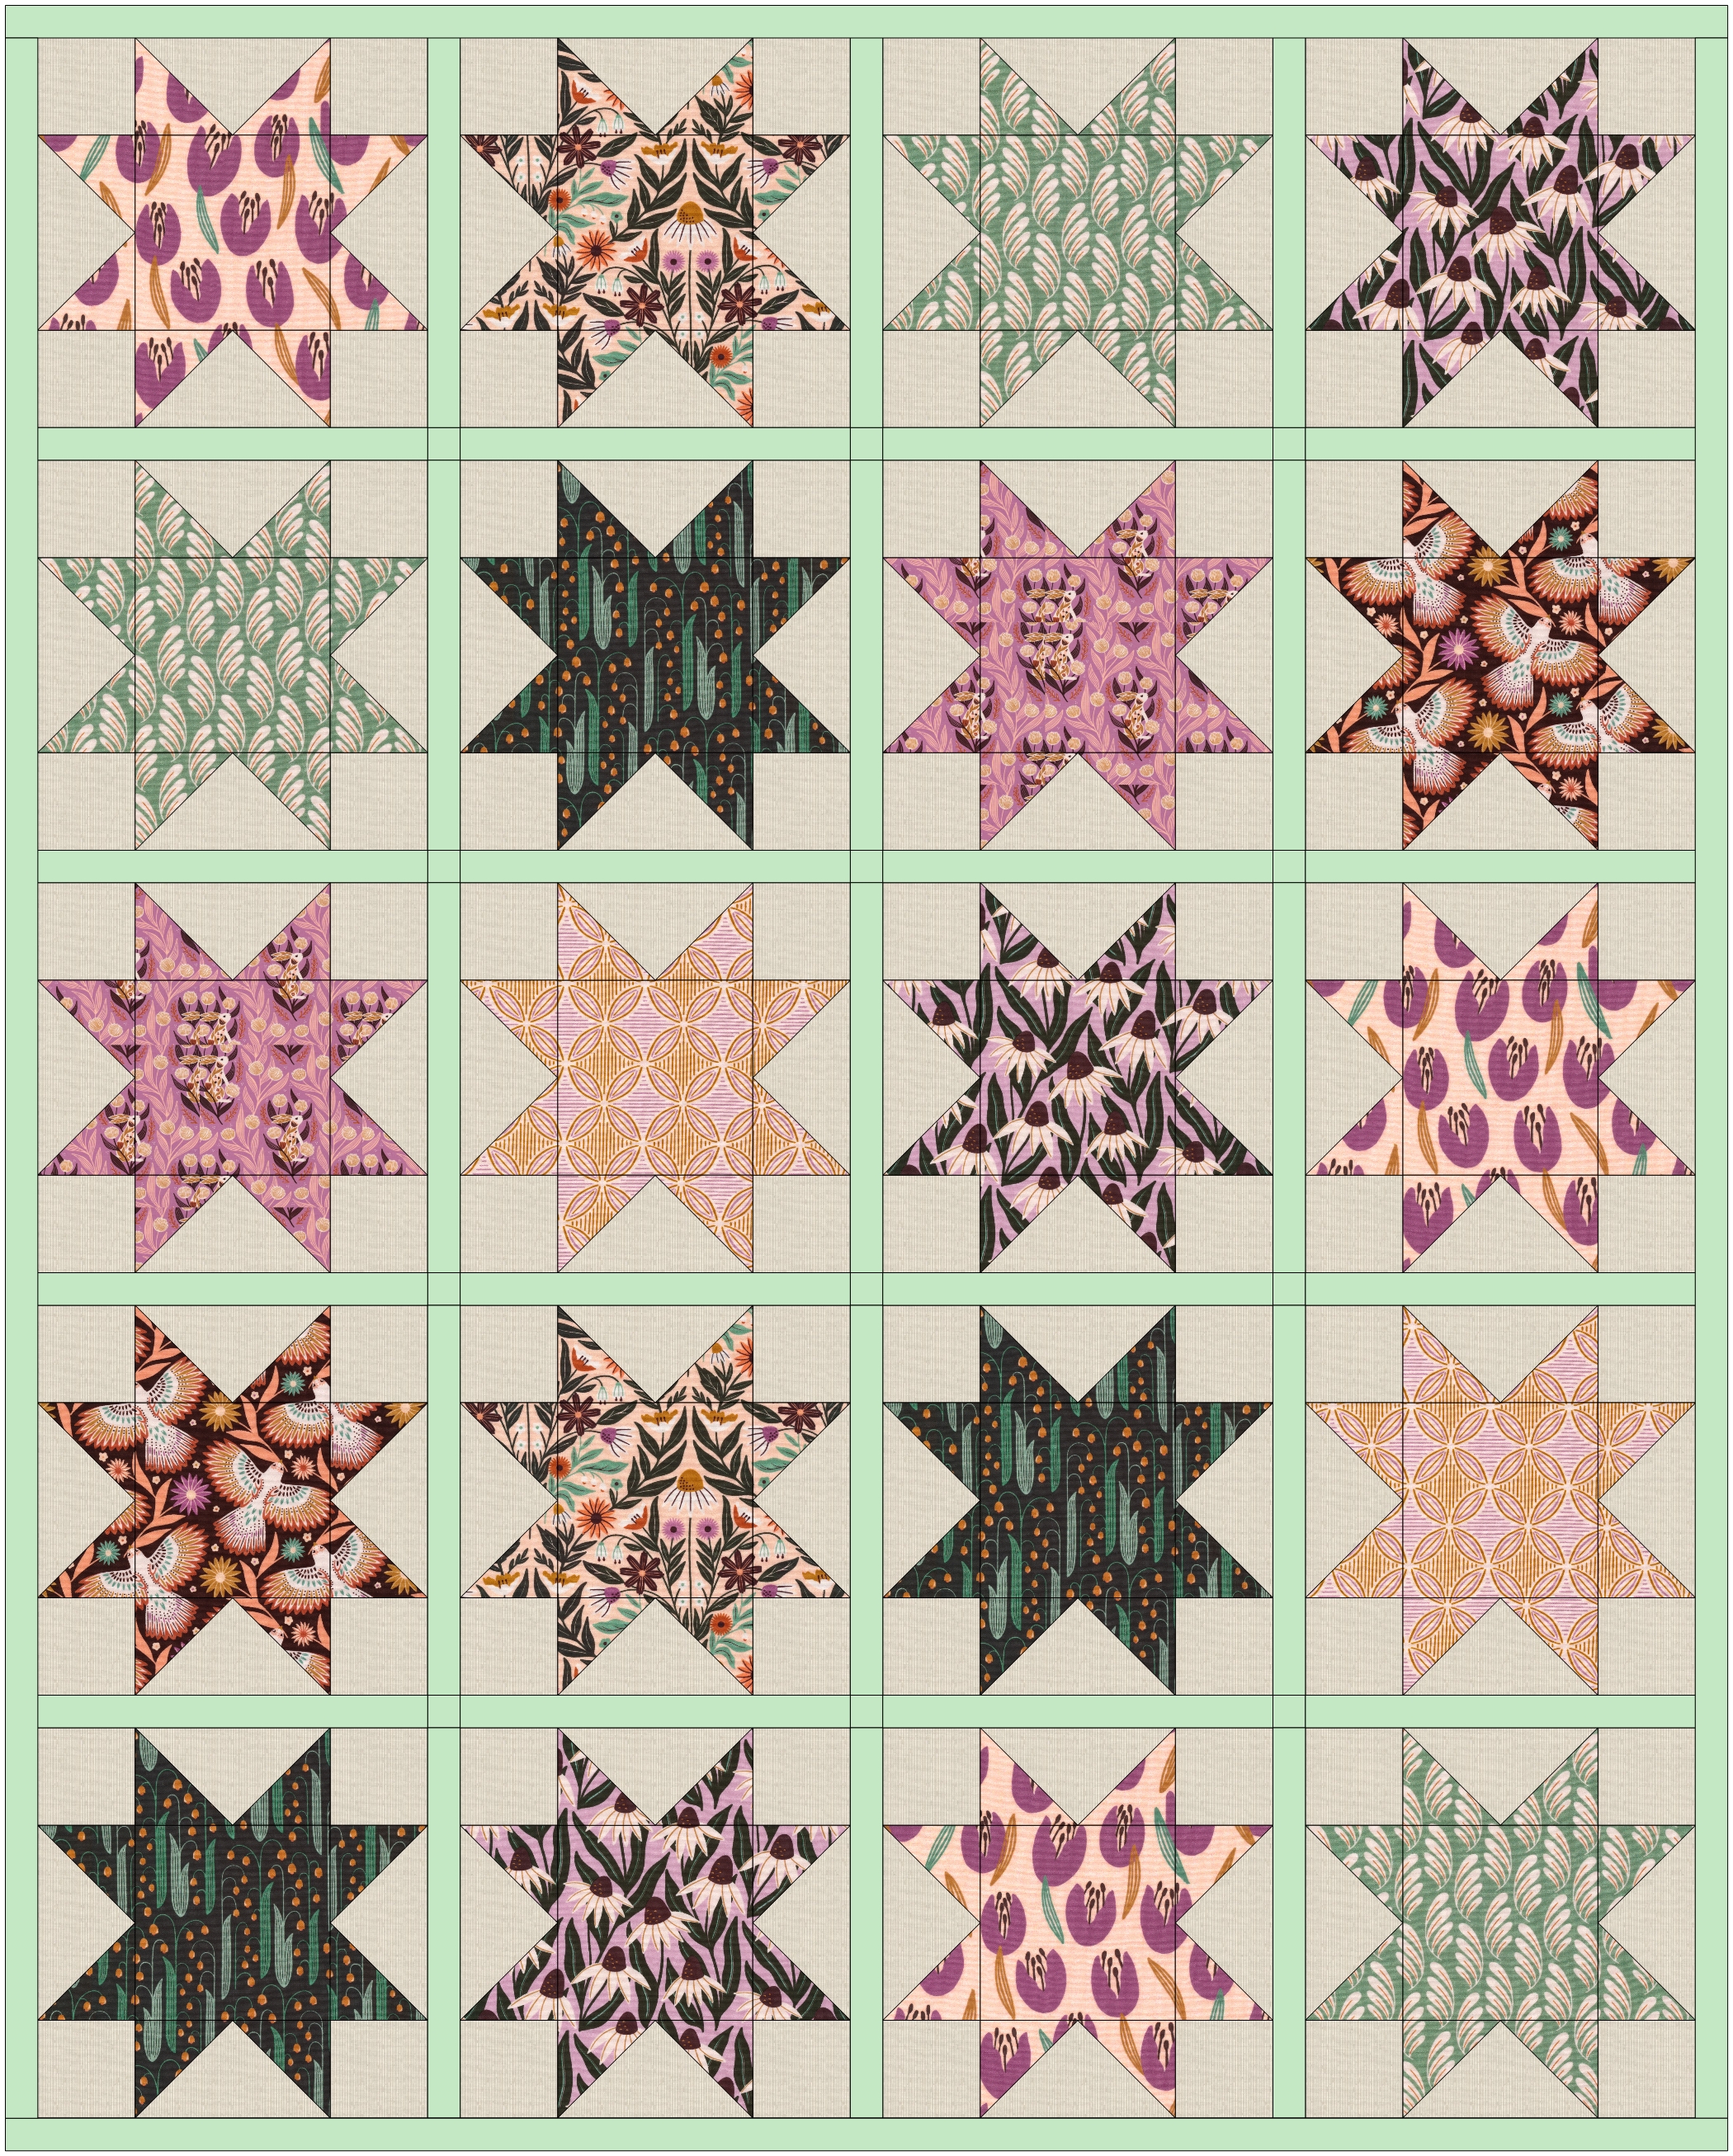 Stoffkit "Blooming" Sawtooth Quilt groß